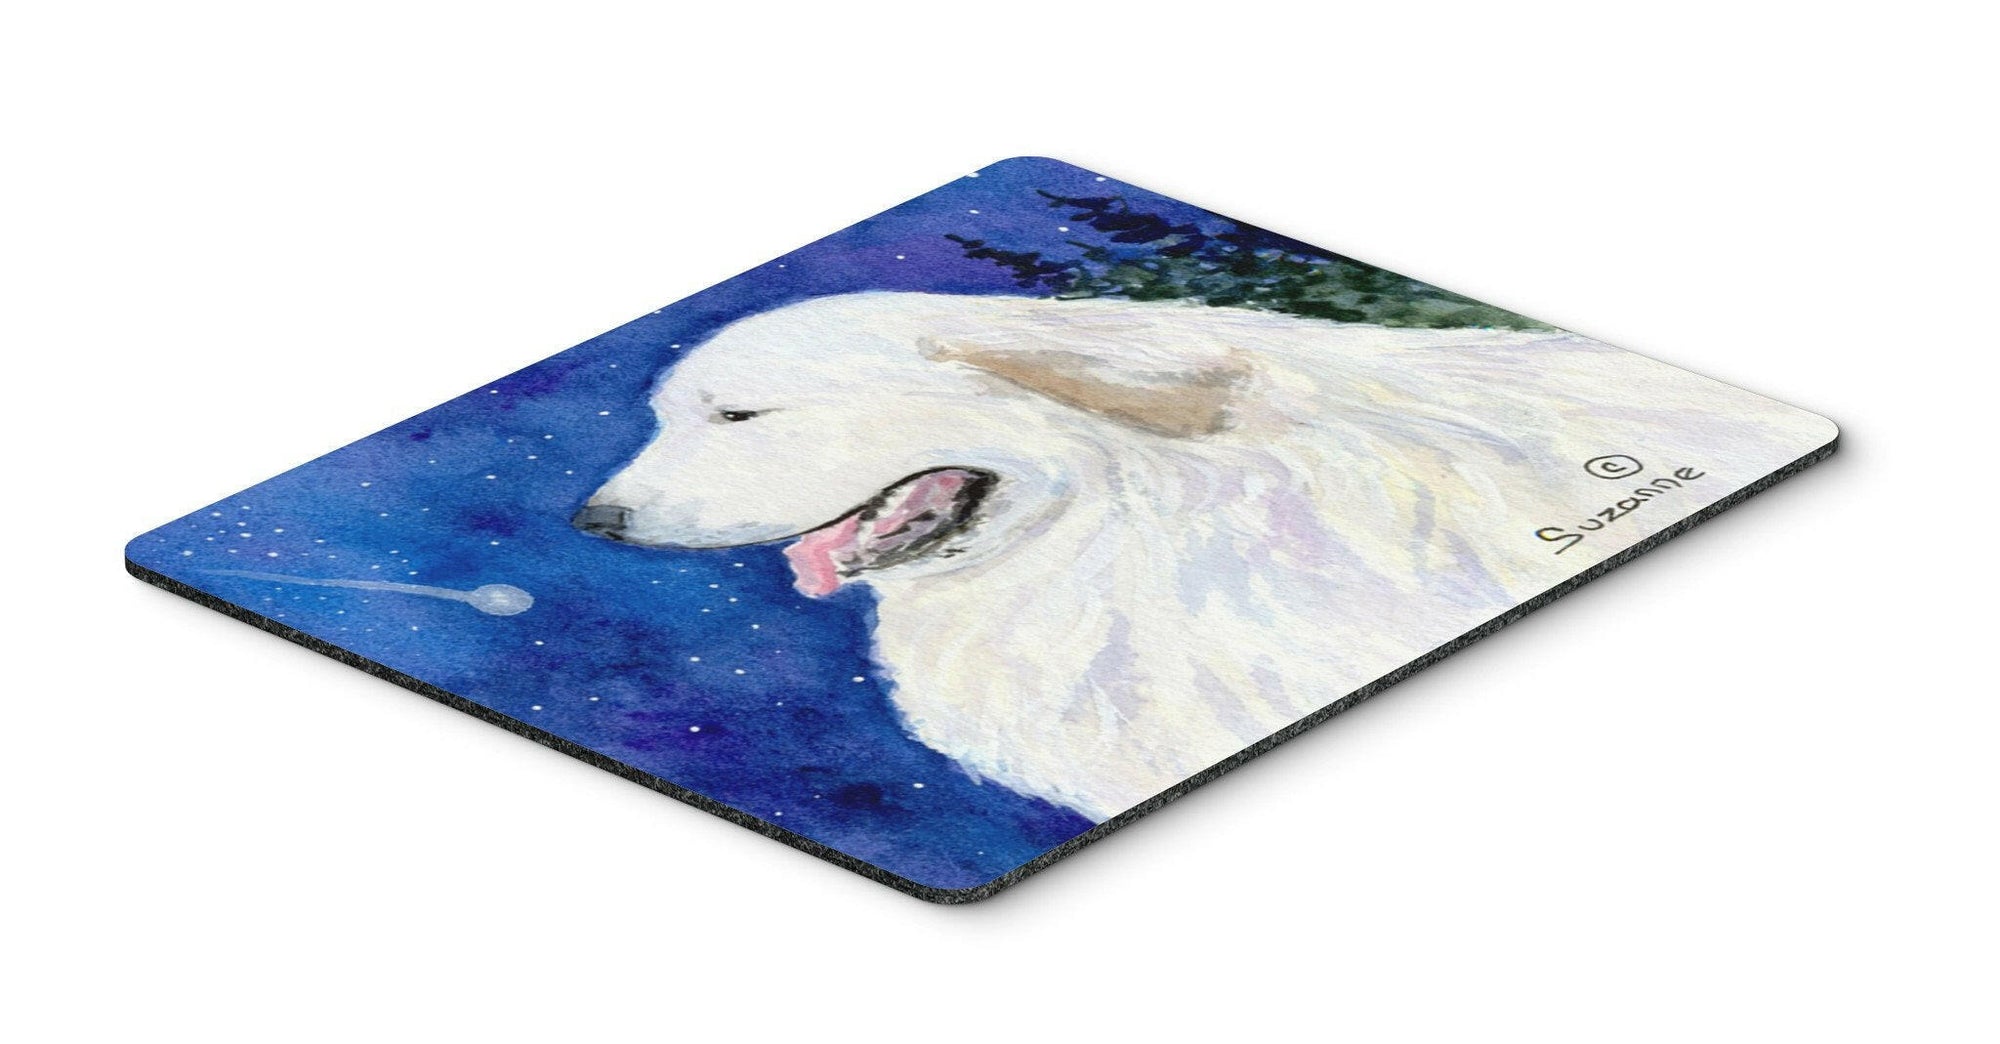 Great Pyrenees Mouse pad, hot pad, or trivet by Caroline's Treasures